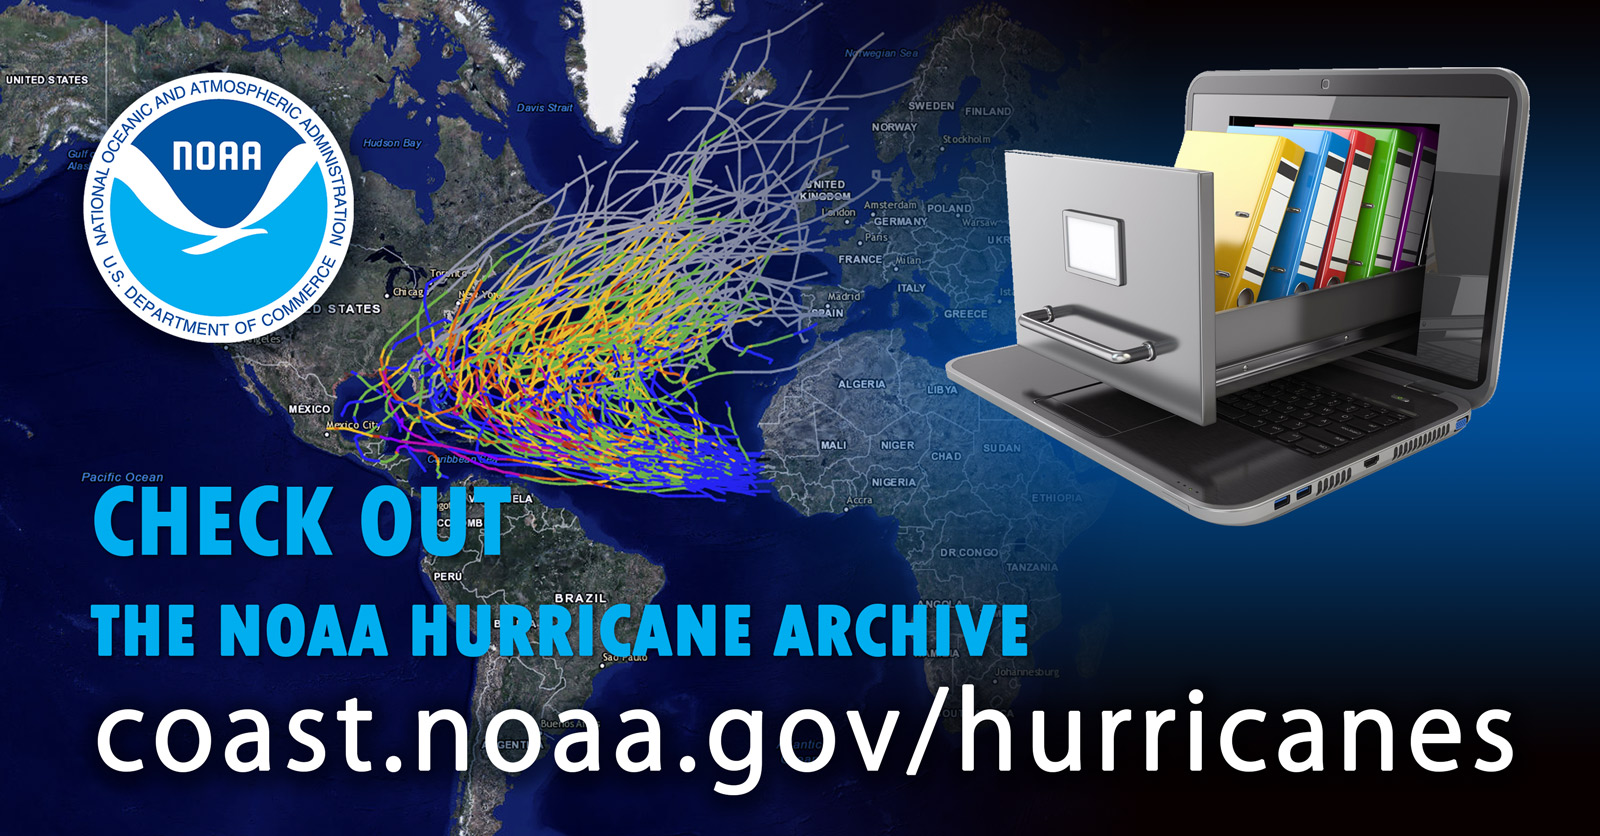 Pictured: a map with hurricane tracks adjacent to a file cabinet and laptop. Text: Check out the NOAA Hurricane Archive.